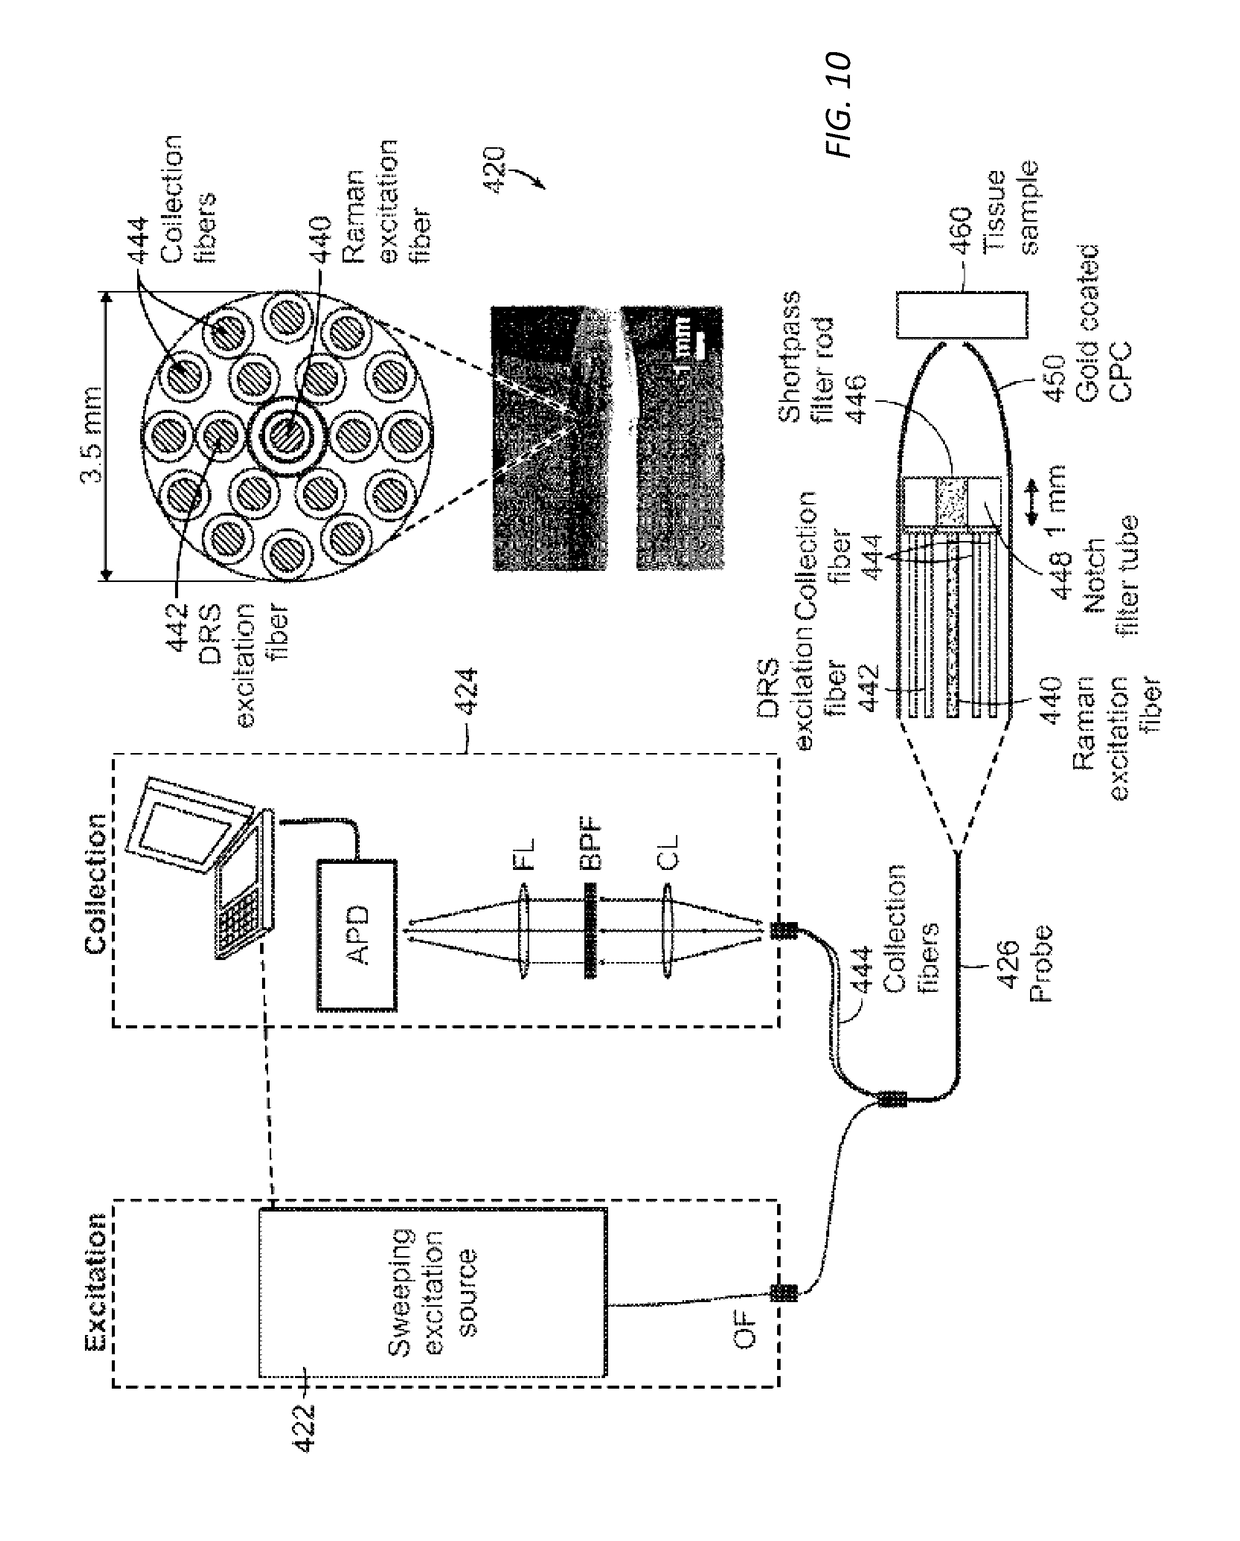 Systems and methods for sampling calibration of non-invasive analyte measurements